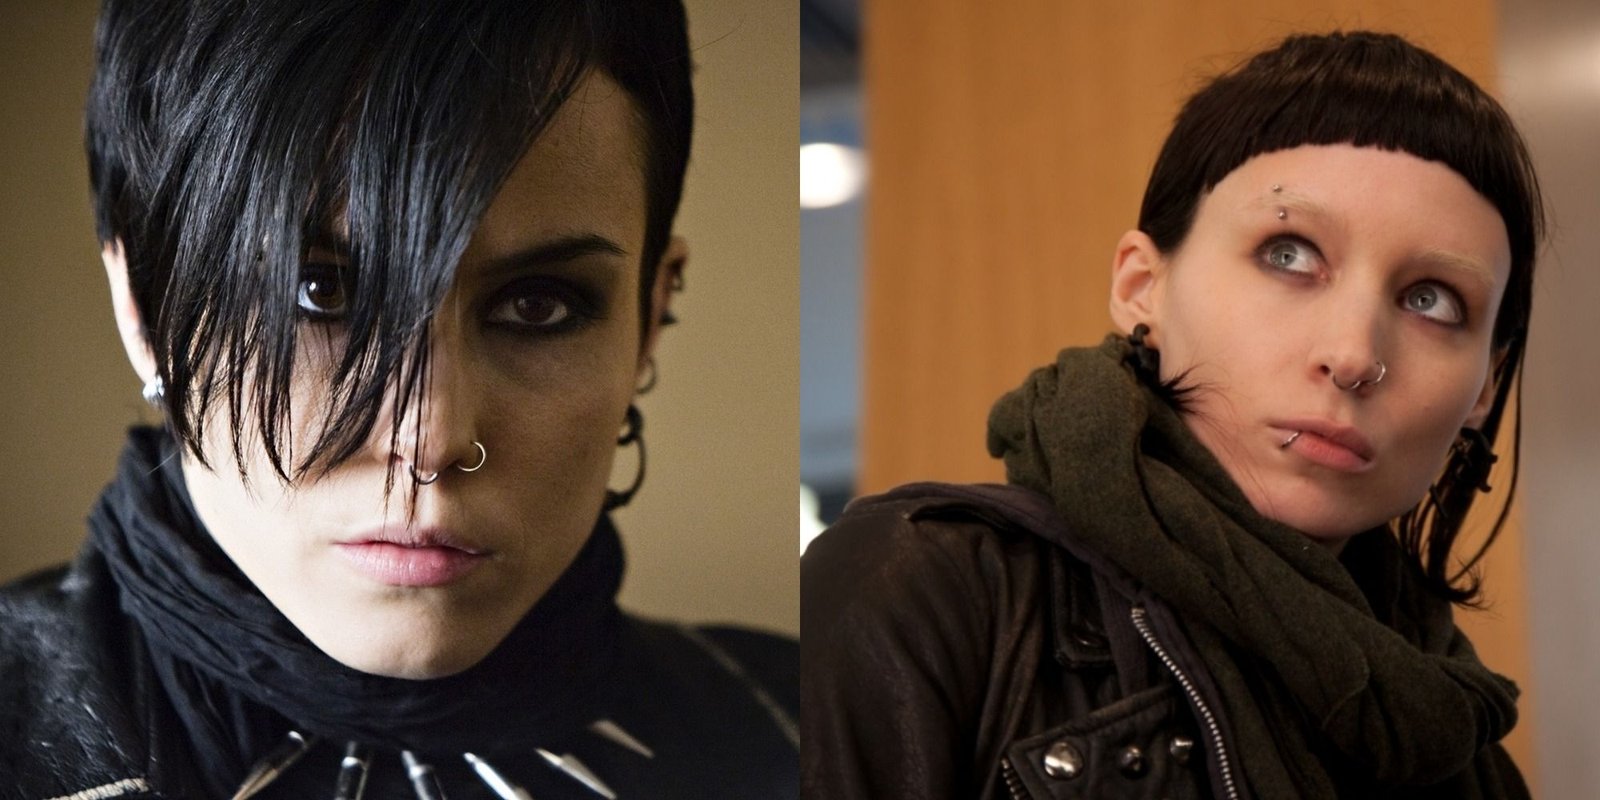 The Girl with the Dragon Tattoo Noomi Rapace and Rooney Mara